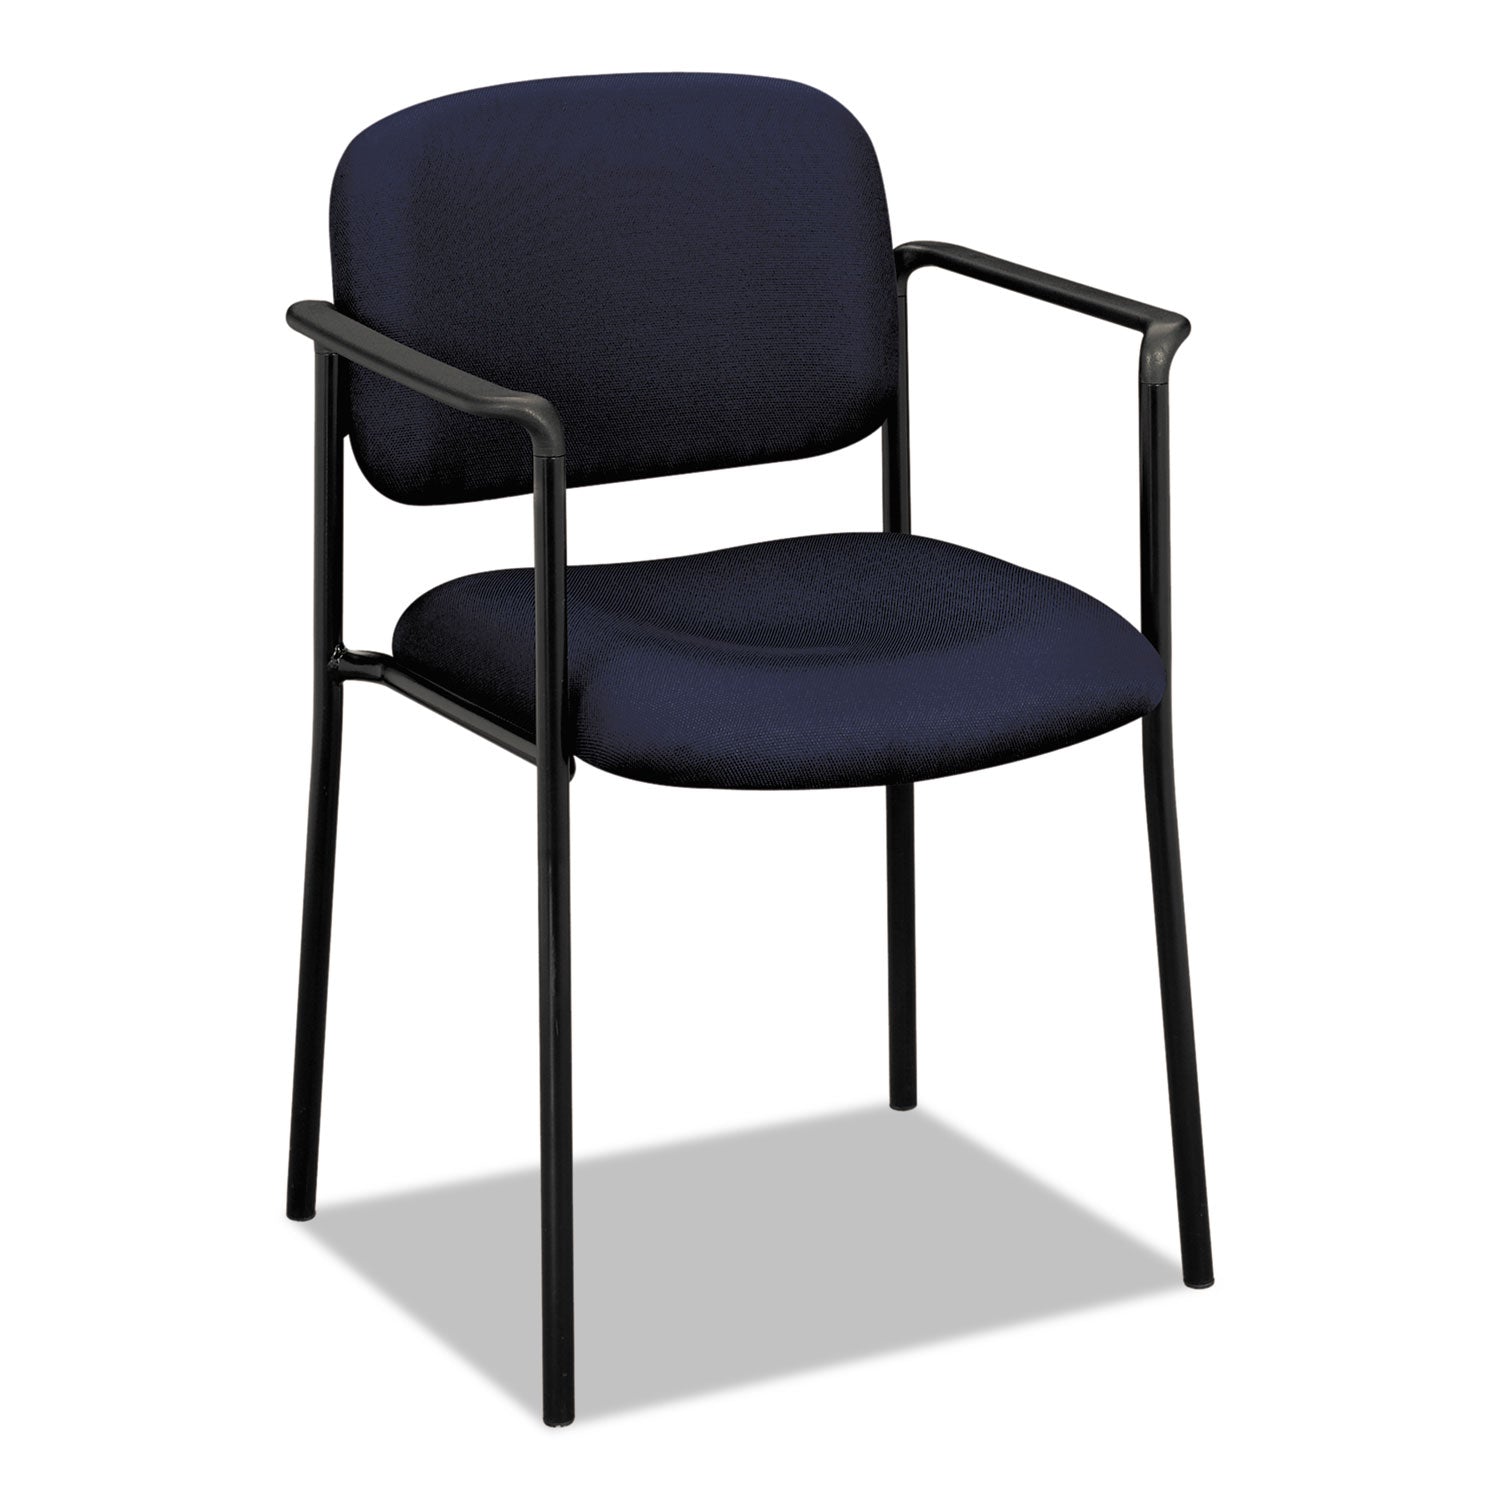 VL616 Stacking Guest Chair with Arms, Fabric Upholstery, 23.25" x 21" x 32.75", Navy Seat, Navy Back, Black Base - 